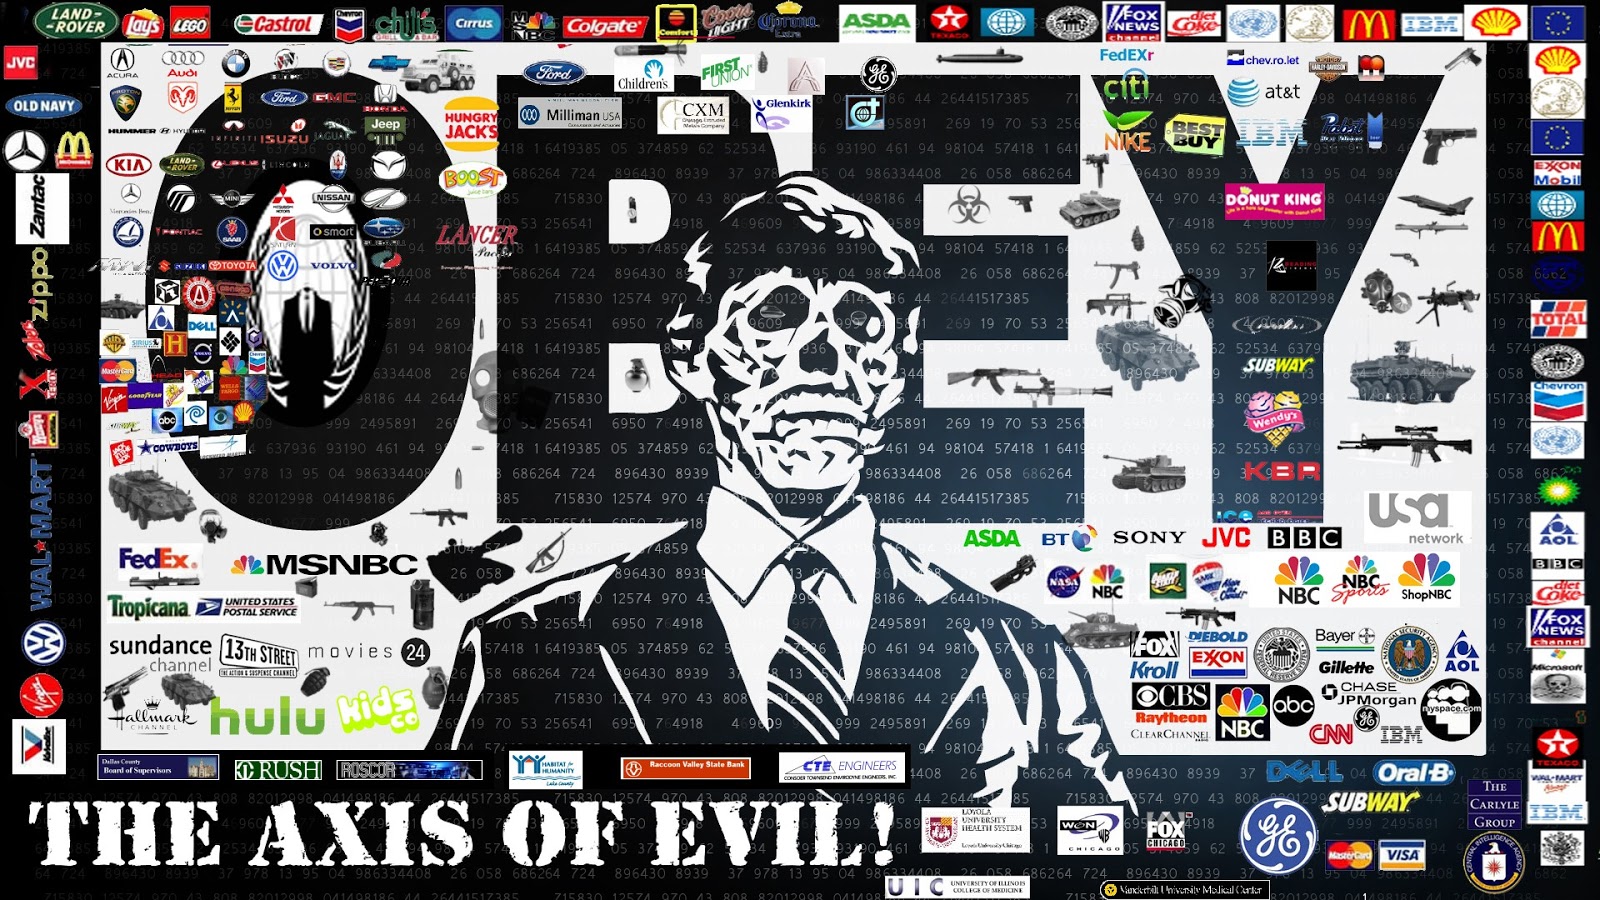 They Live Wallpapers